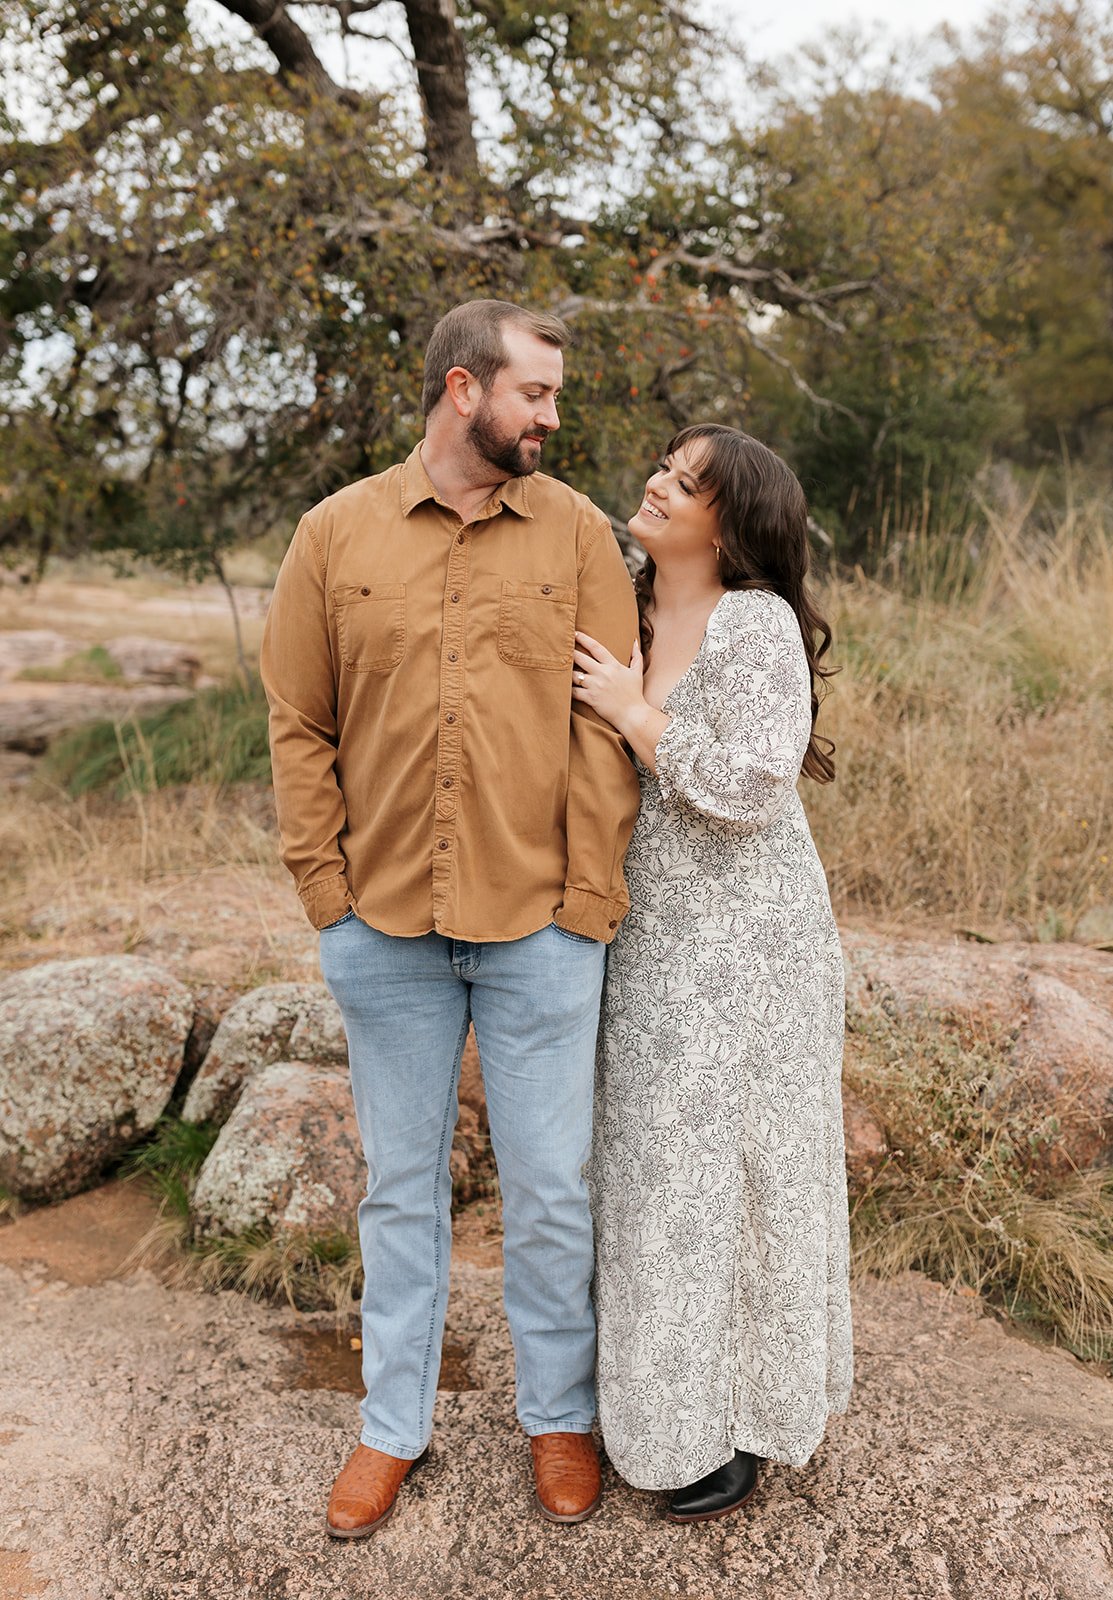 Enchanted Rock State Natural Area has diverse engagement photo backdrops